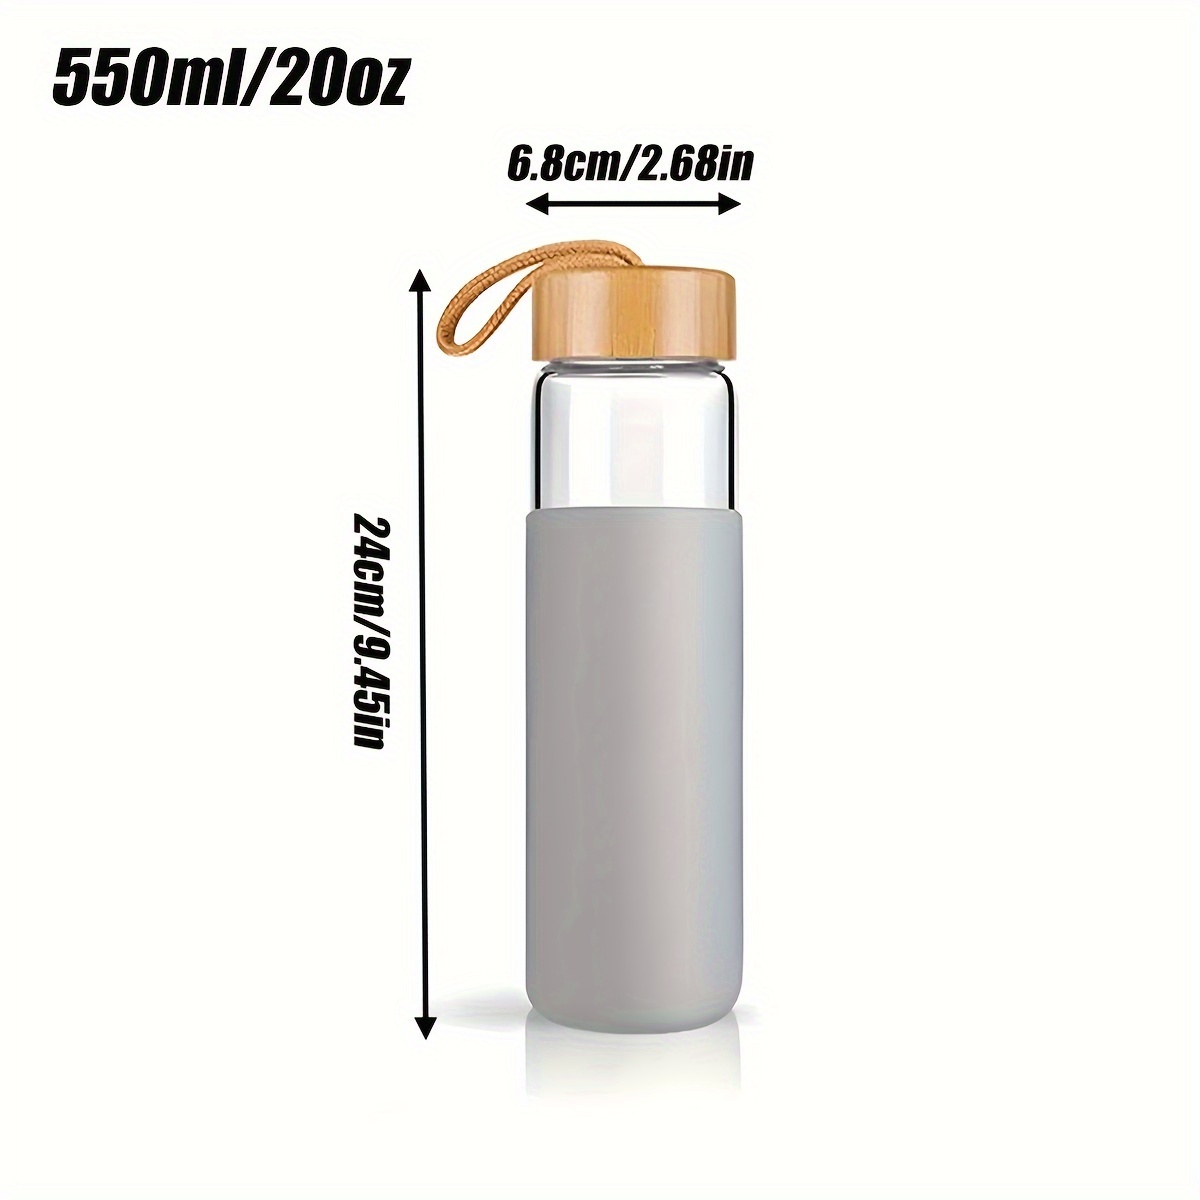 Reusable Borosilicate Glass Water Bottle with Silicone Sleeve, Bamboo